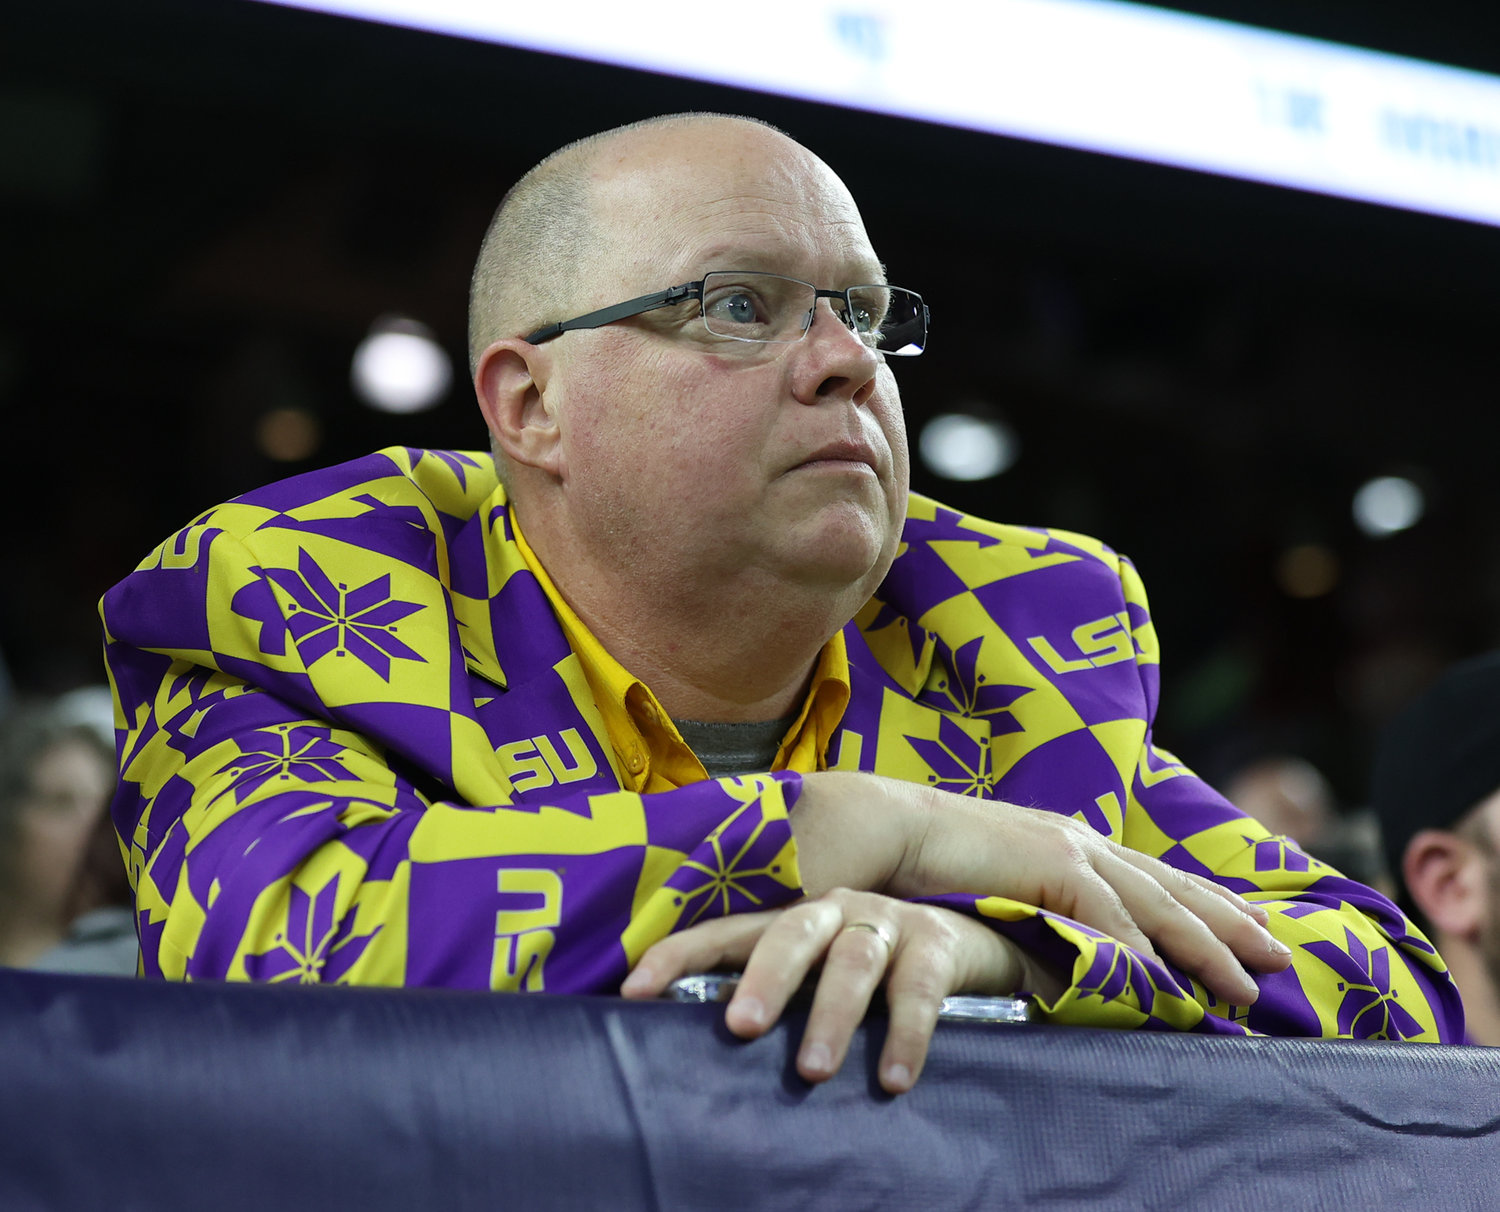 An LSU Tigers fan during the TaxAct Texas Bowl on Jan. 4, 2022 in Houston, Texas.